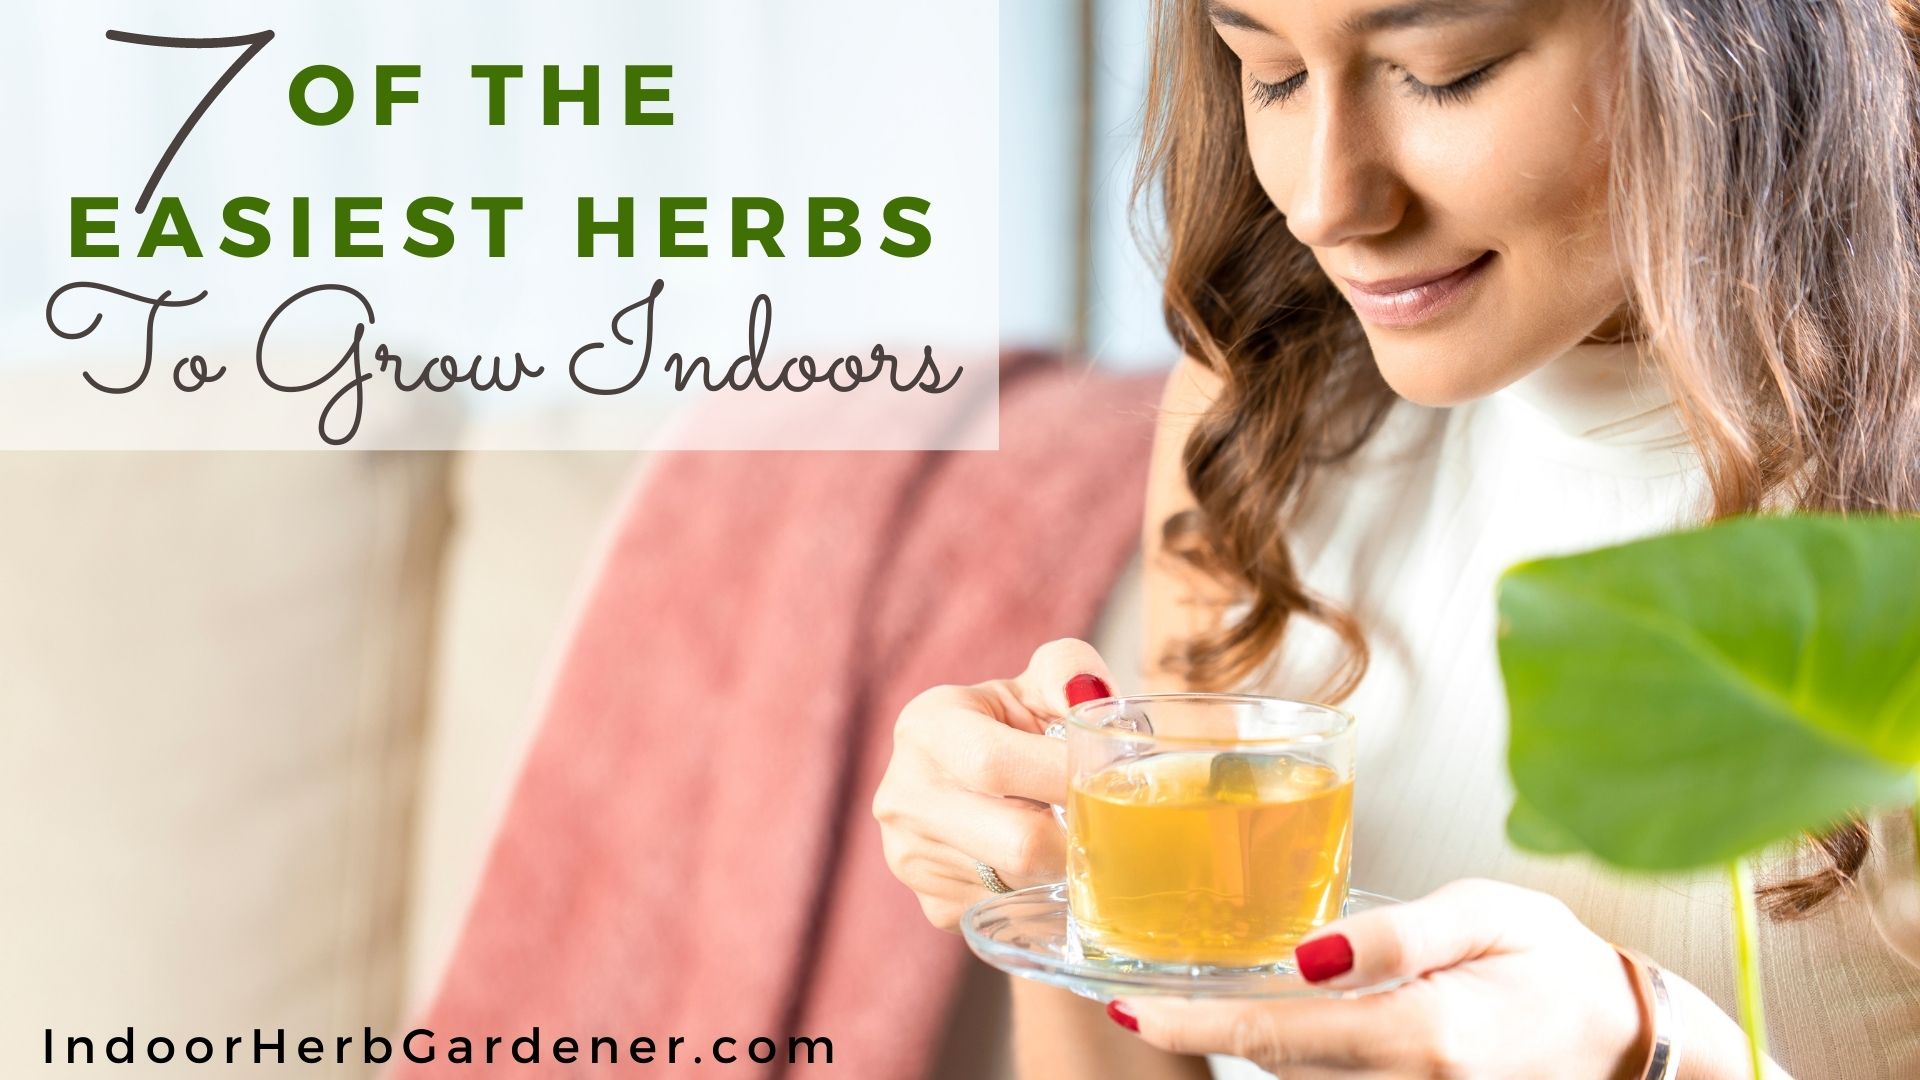 7 Of The Easiest Herbs To Grow Indoors